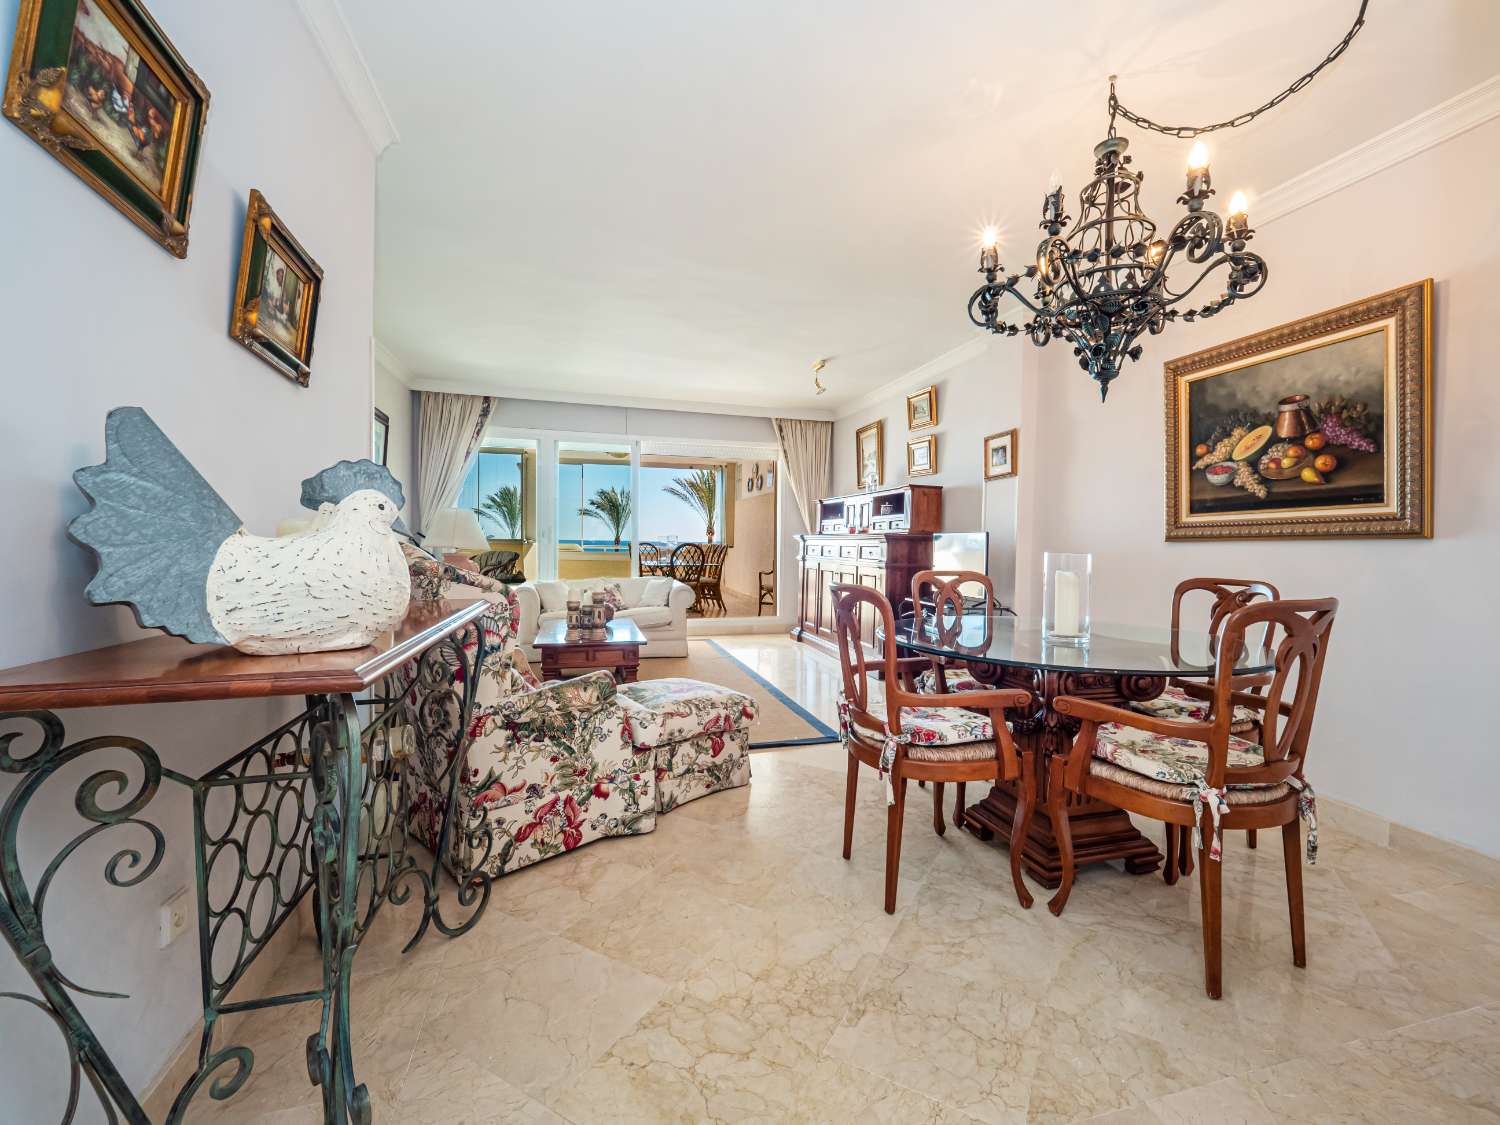 Apartment on the beachfront very close to Puerto Banús, right on the seafront.